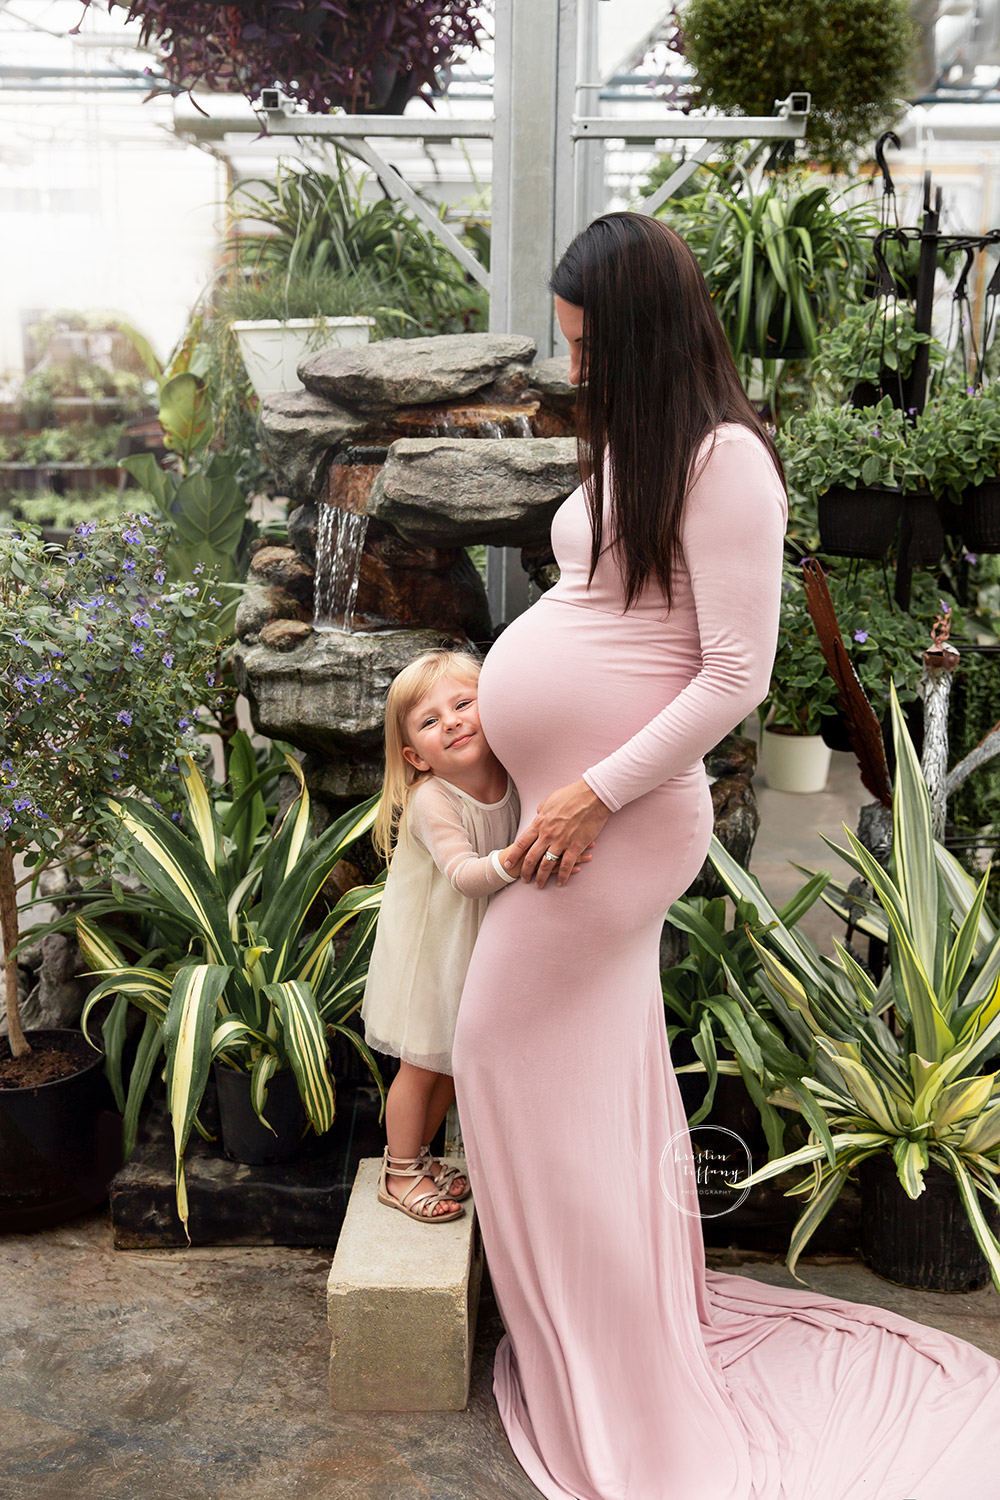 a maternity photo from a maternity photoshoot